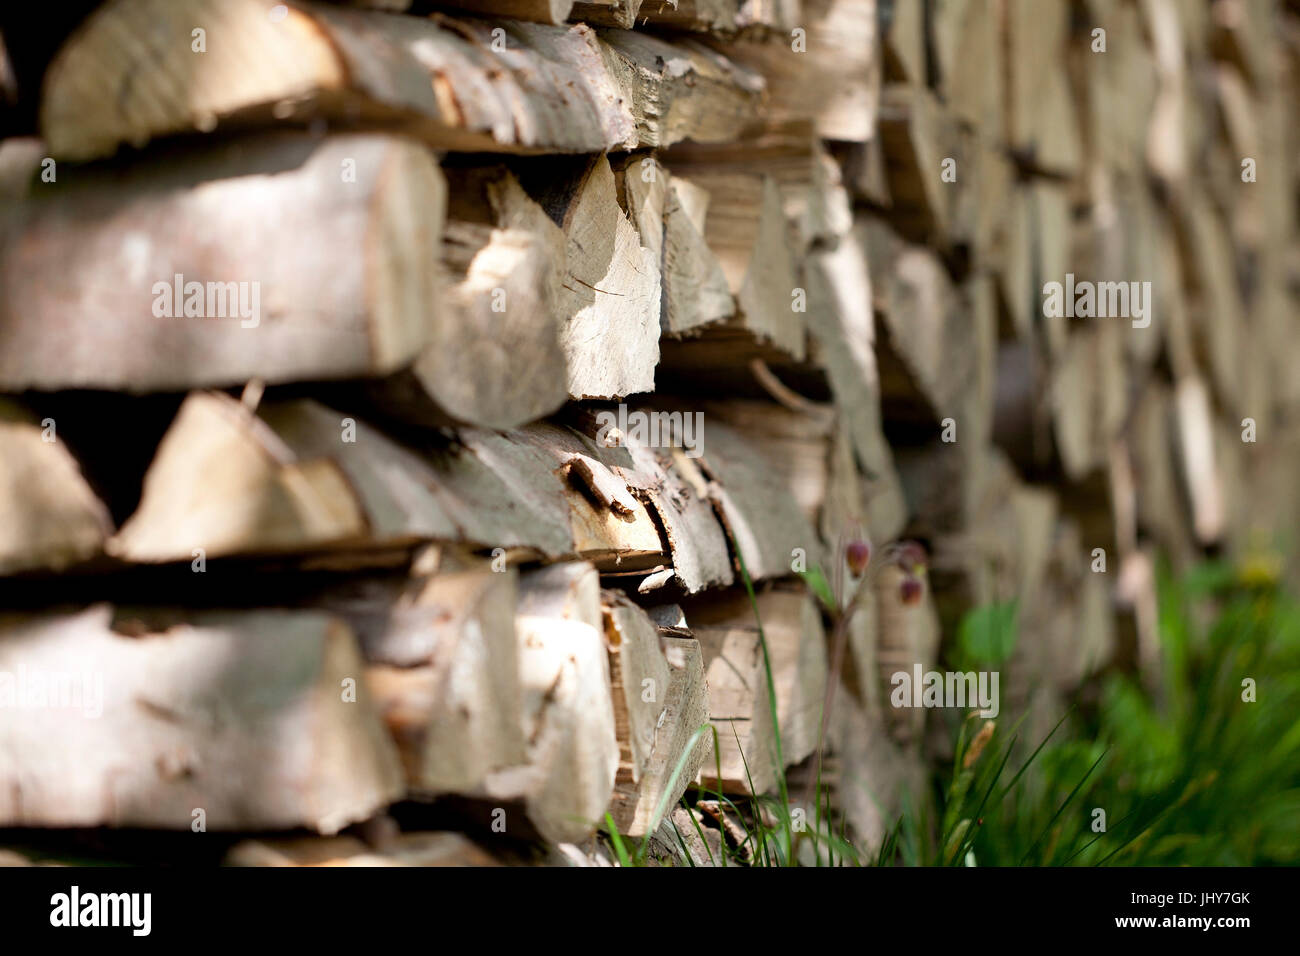 Firewood pile, fire wood, wooden pile - stack of firewood, Brennholzstapel, Feuerholz, Holzstapel - Stack of firewood Stock Photo